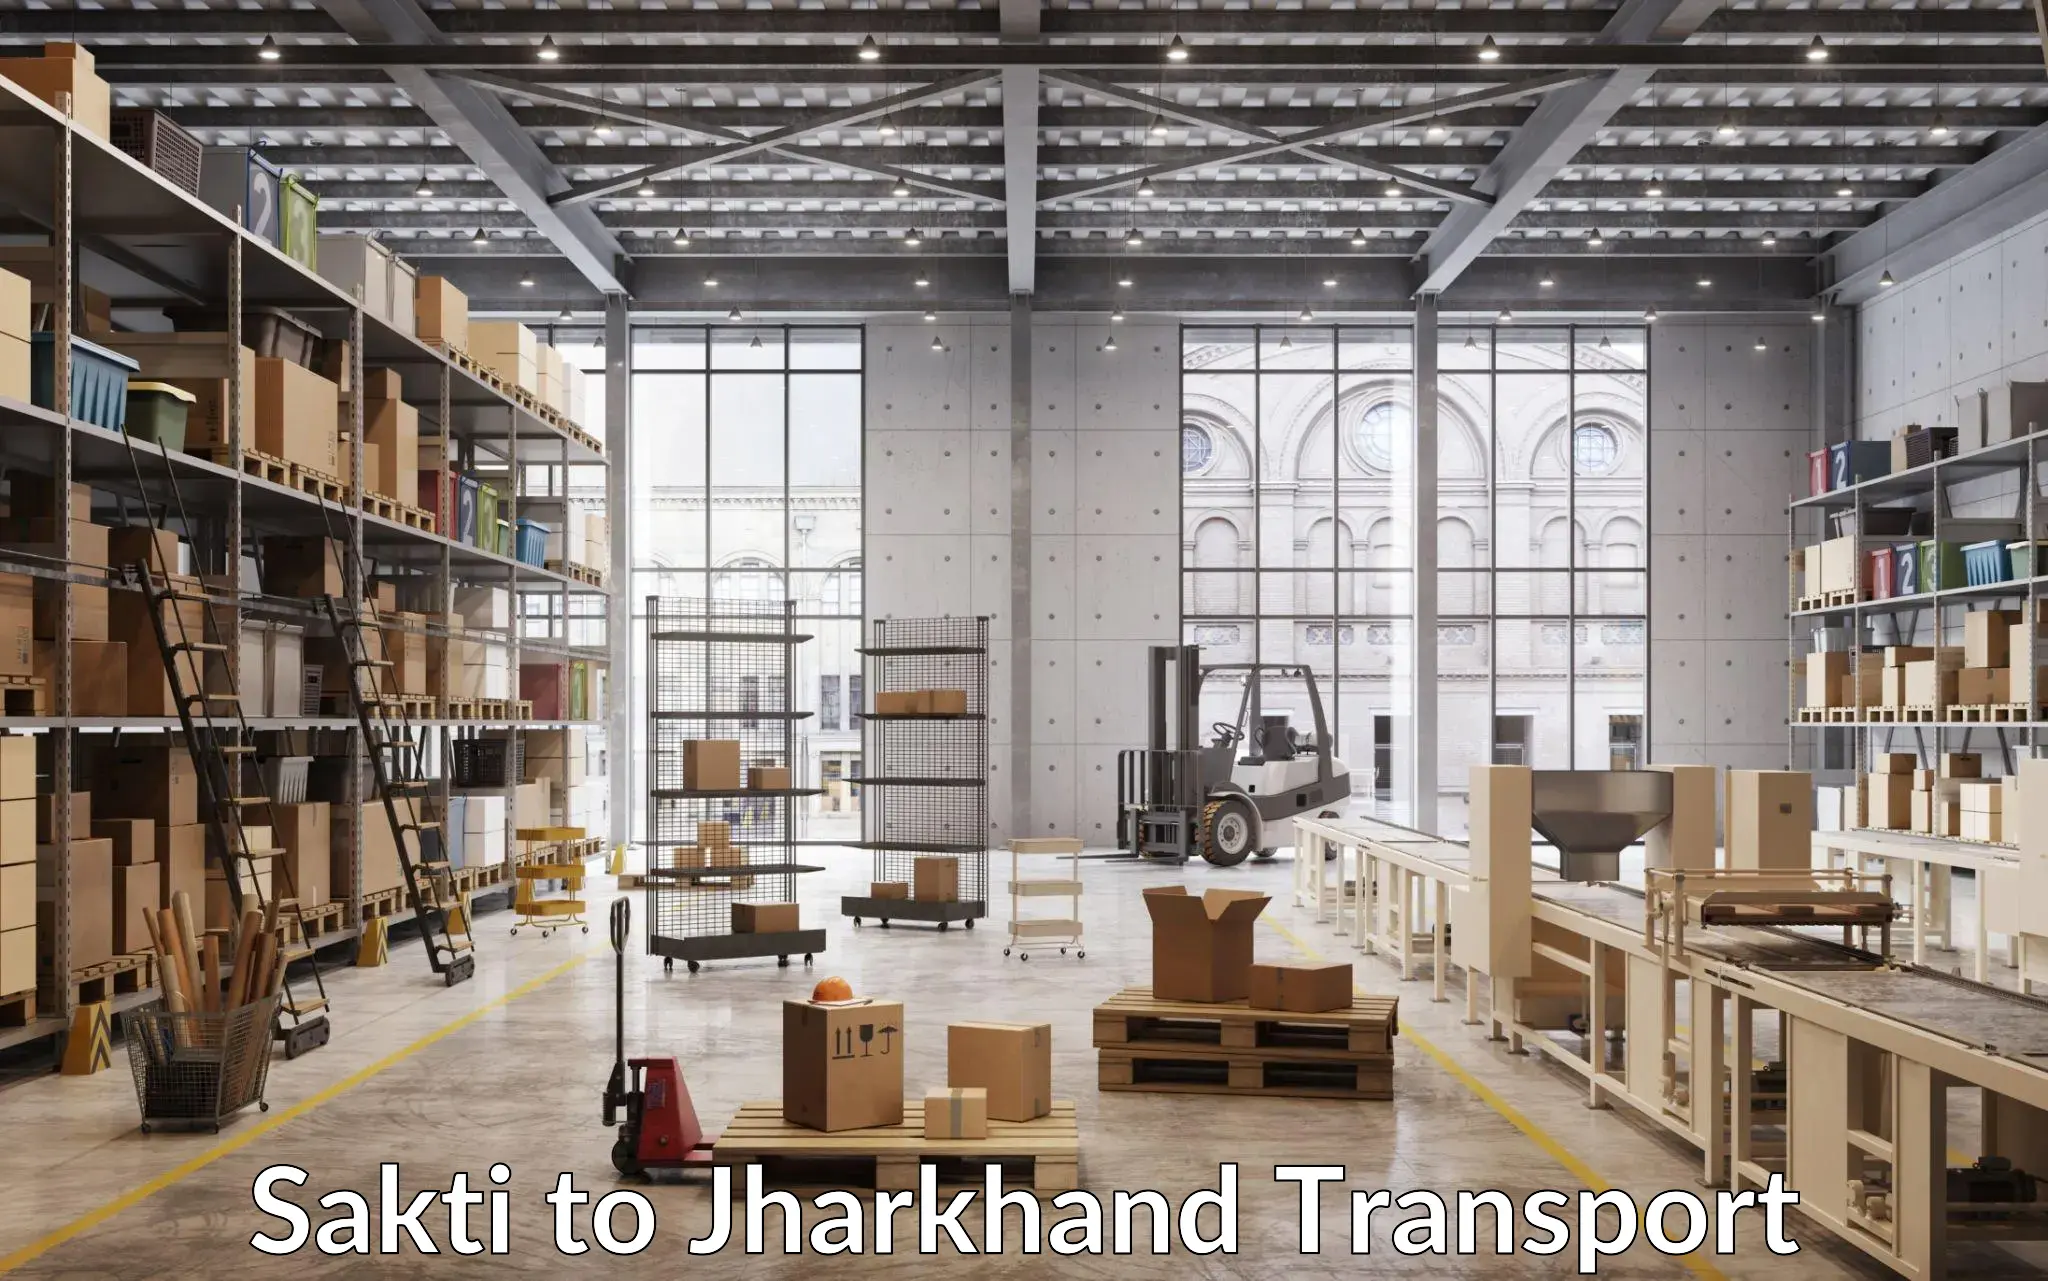 Container transport service Sakti to Chandil